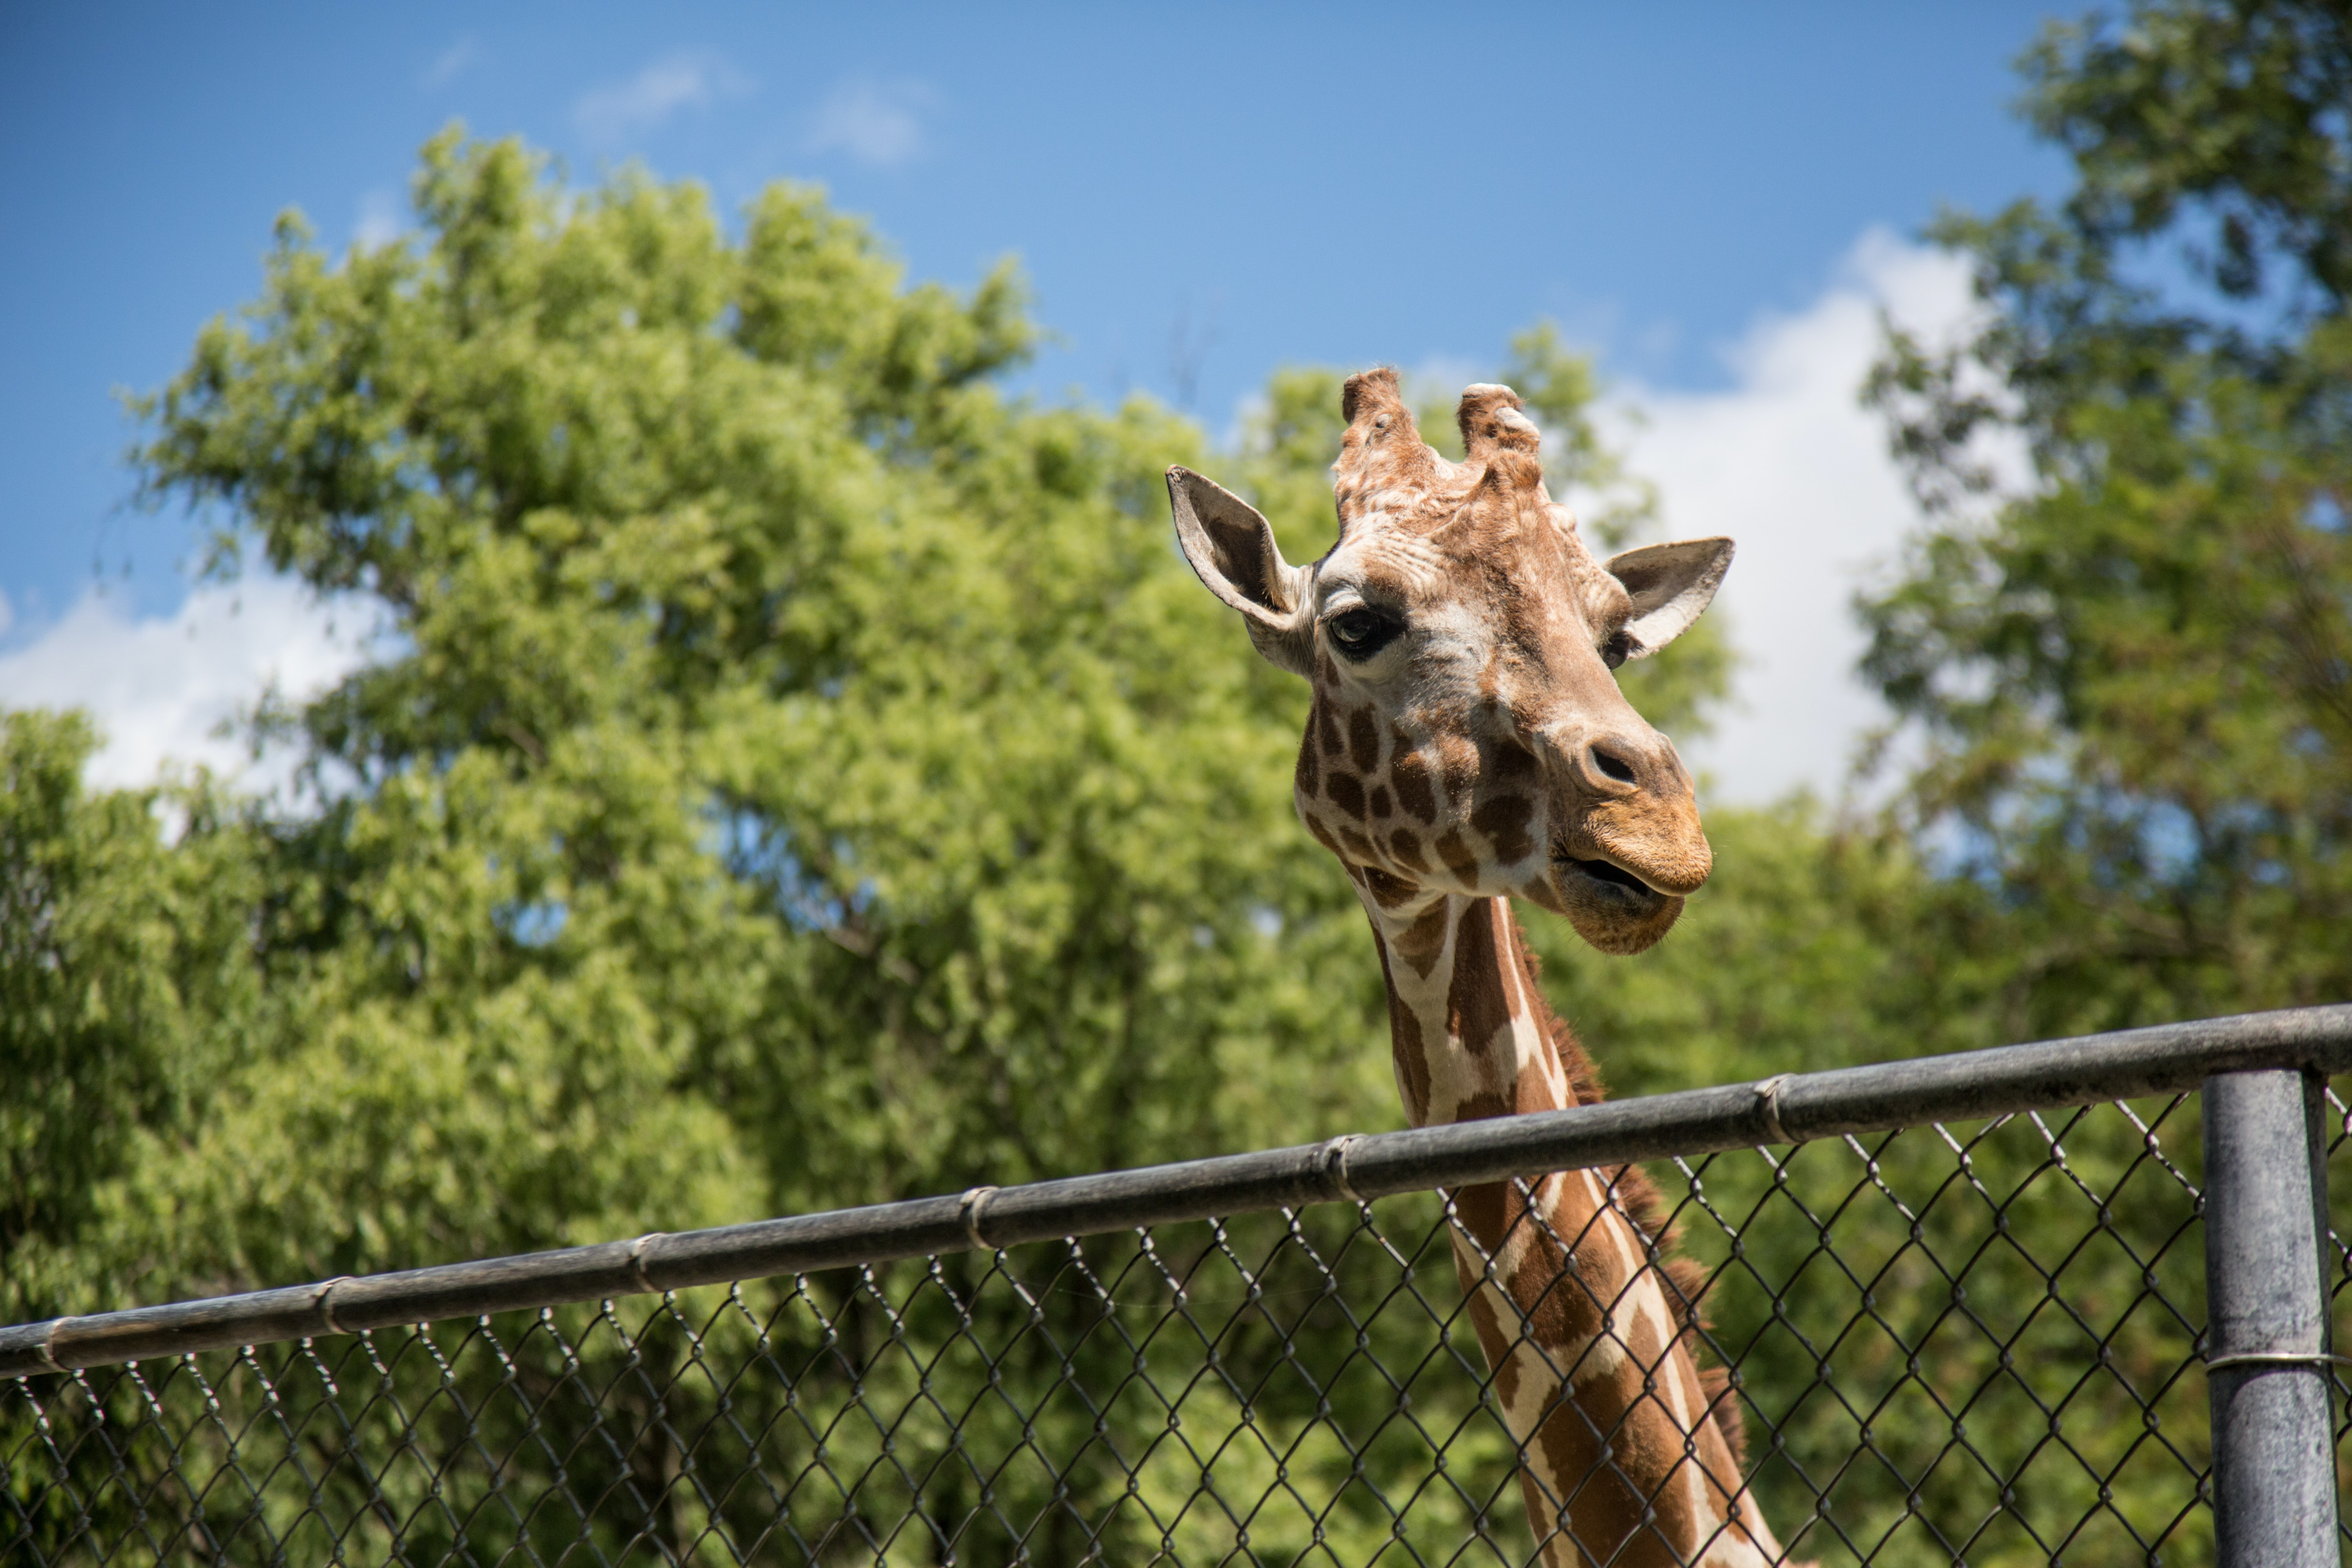 Giraffe looking over a fence